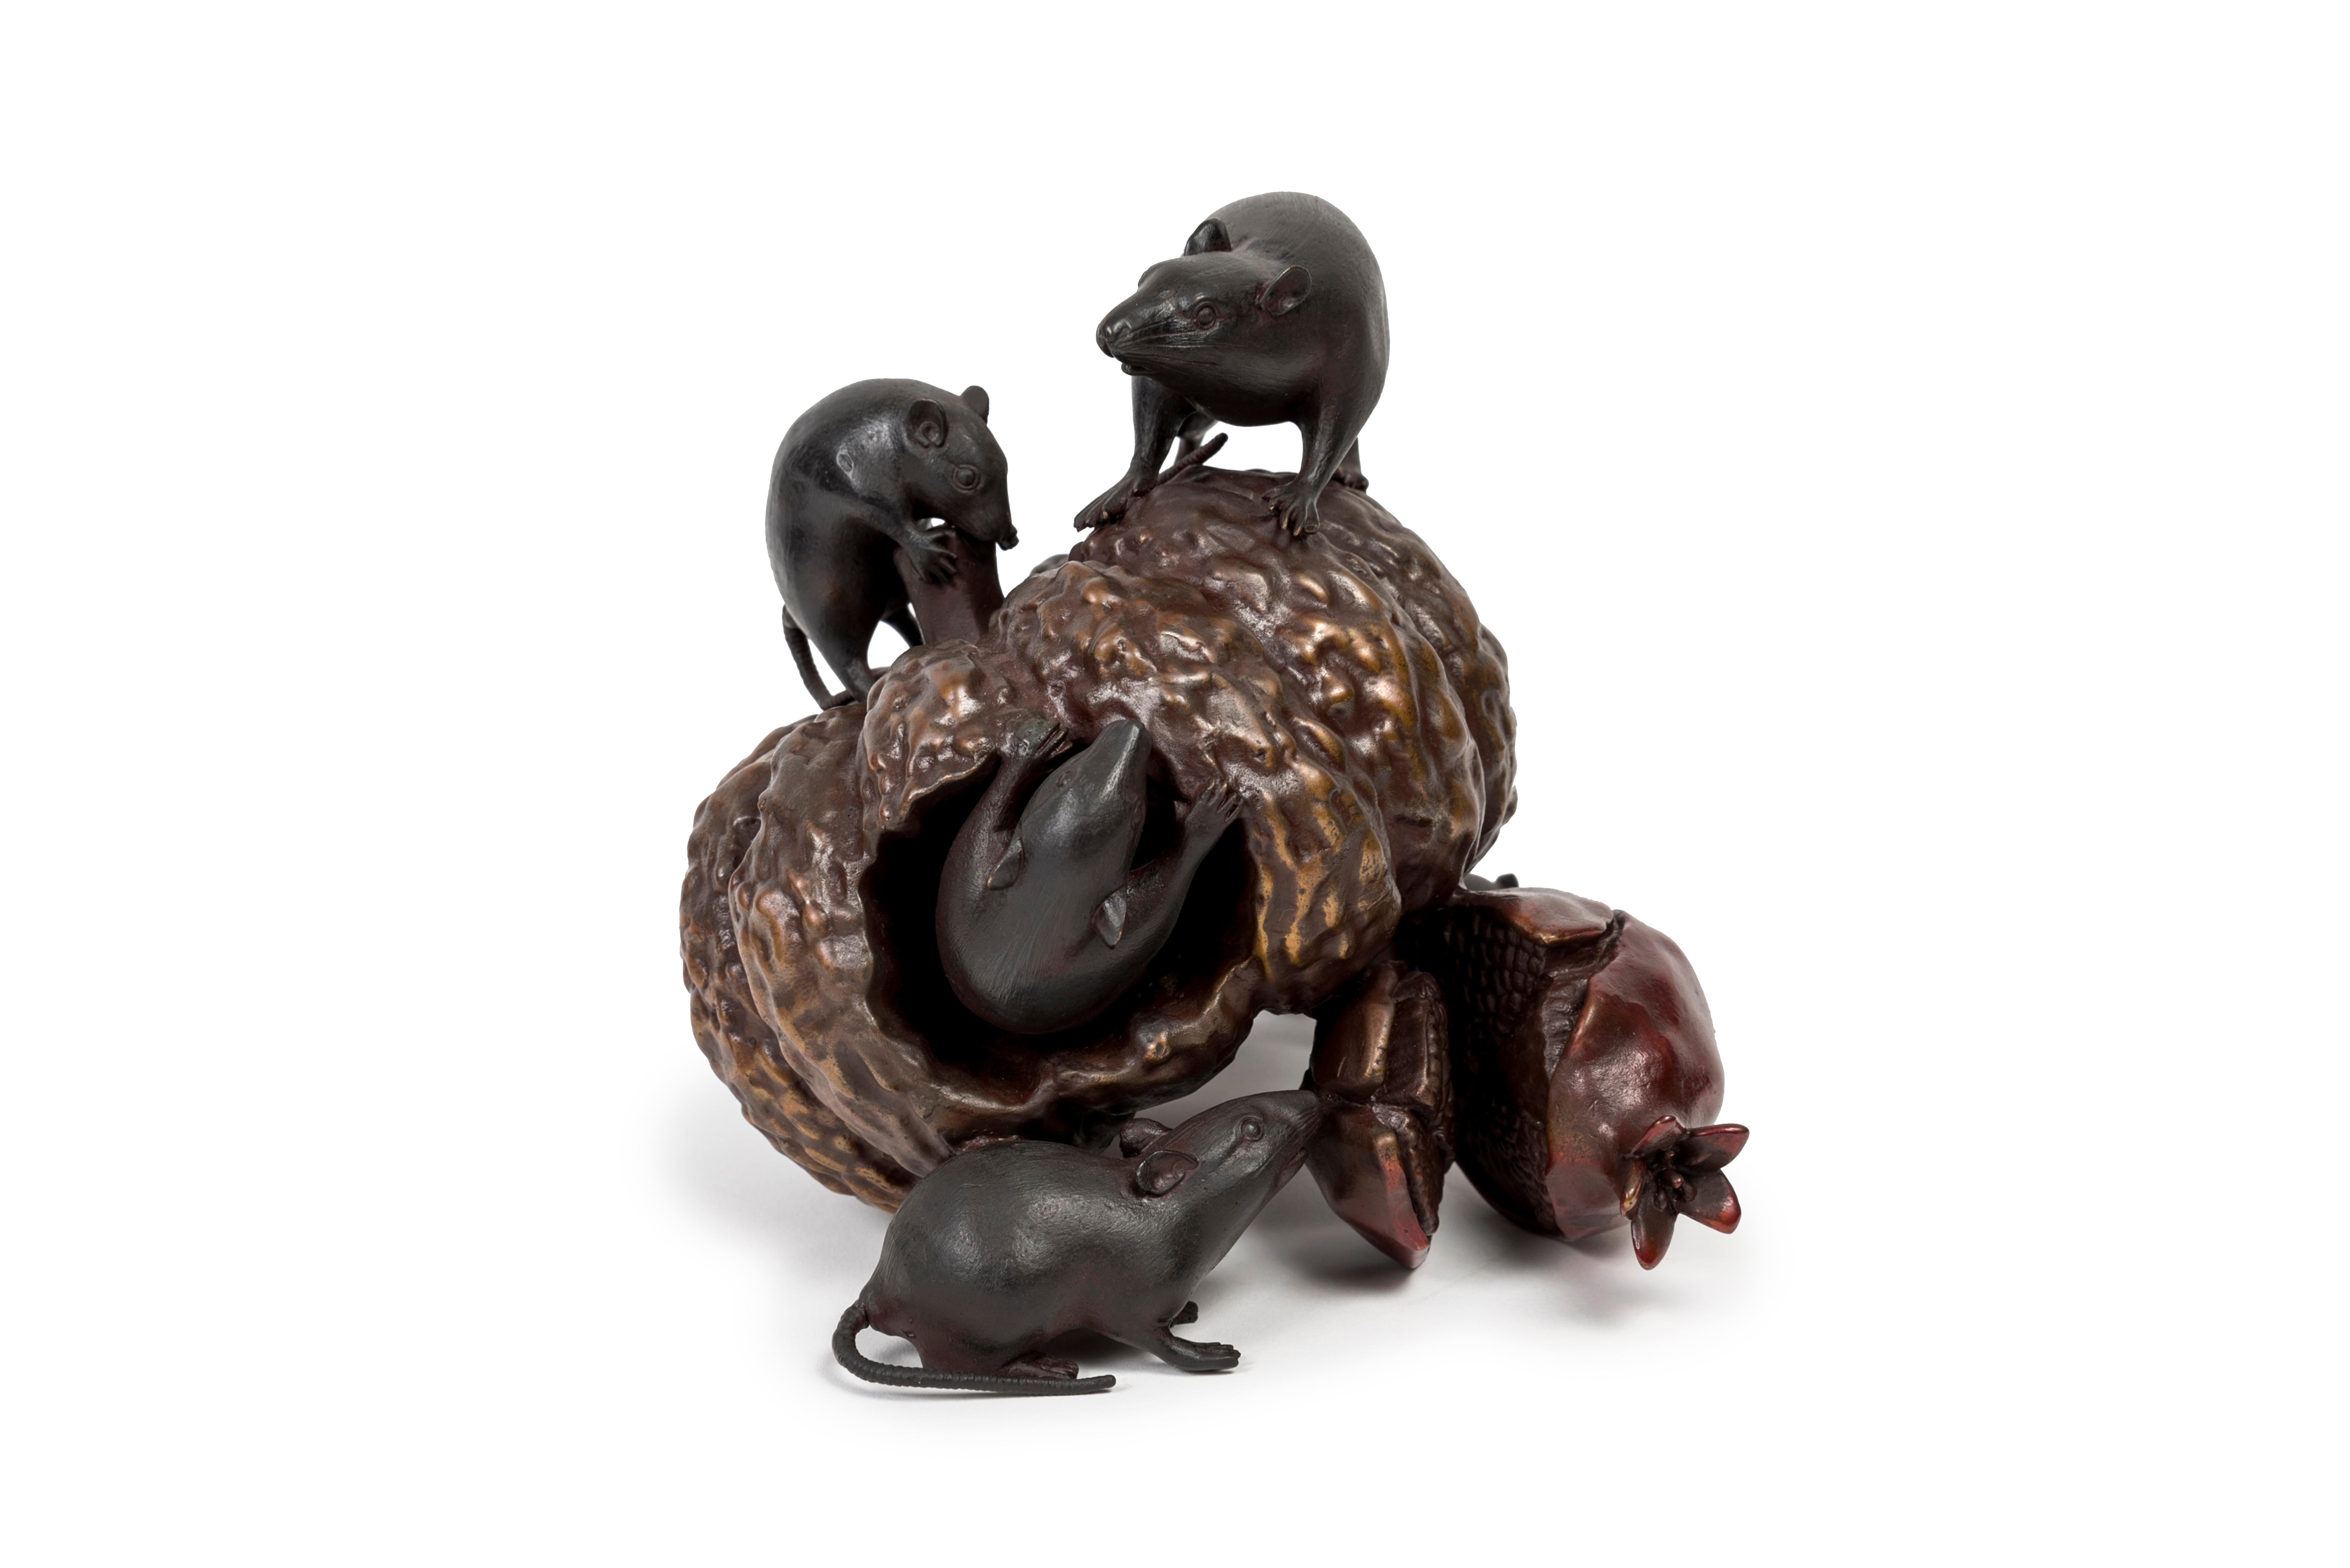 Polychrome bronze of a group of mice around a pumpkin and a pomegranate. The five mice have a dark brown patina, while the hollowed-out gourd is dark brown and the split pomegranate is dark red. 

Written in a cartouche on one of the pumpkin